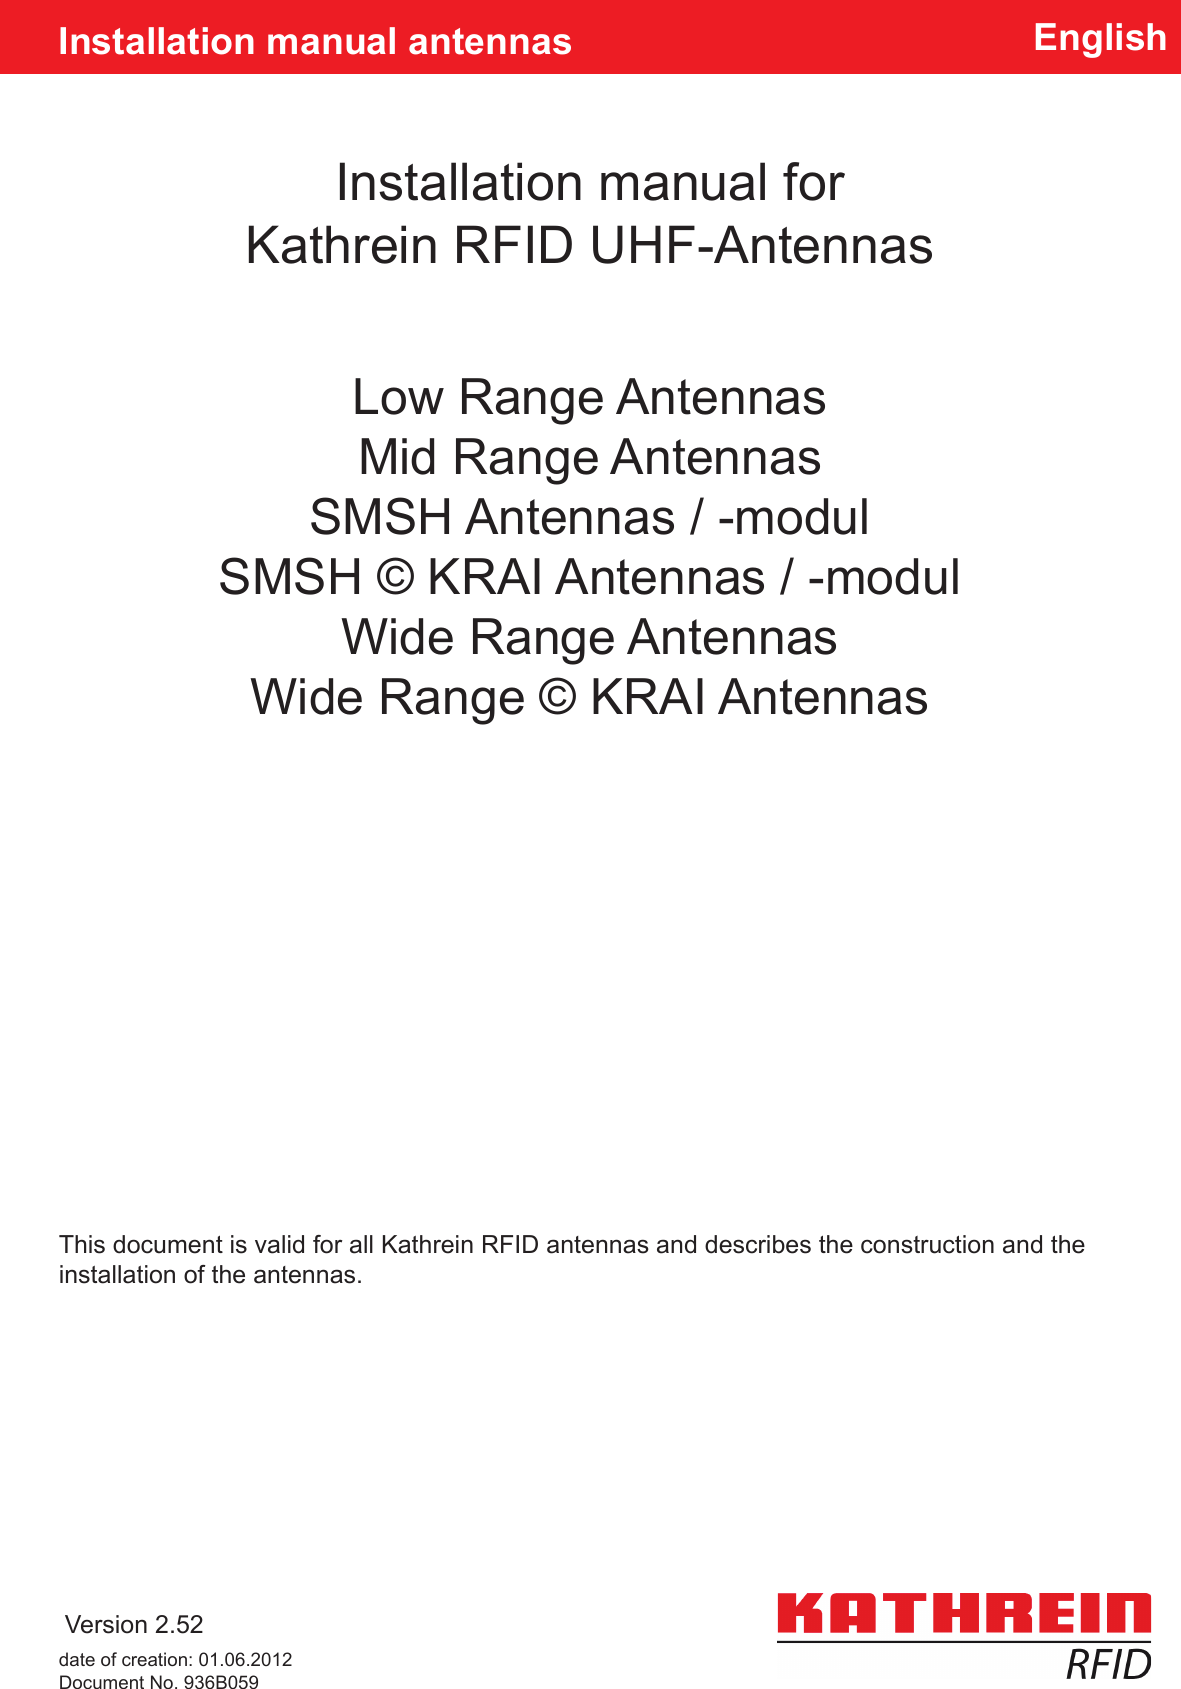 EnglishInstallation manual forKathrein RFID UHF-AntennasInstallation manual antennasVersion 2.52This document is valid for all Kathrein RFID antennas and describes the construction and the installation of the antennas.Low Range AntennasMid Range AntennasSMSH Antennas / -modulSMSH © KRAI Antennas / -modulWide Range AntennasWide Range © KRAI Antennasdate of creation: 01.06.2012Document No. 936B059